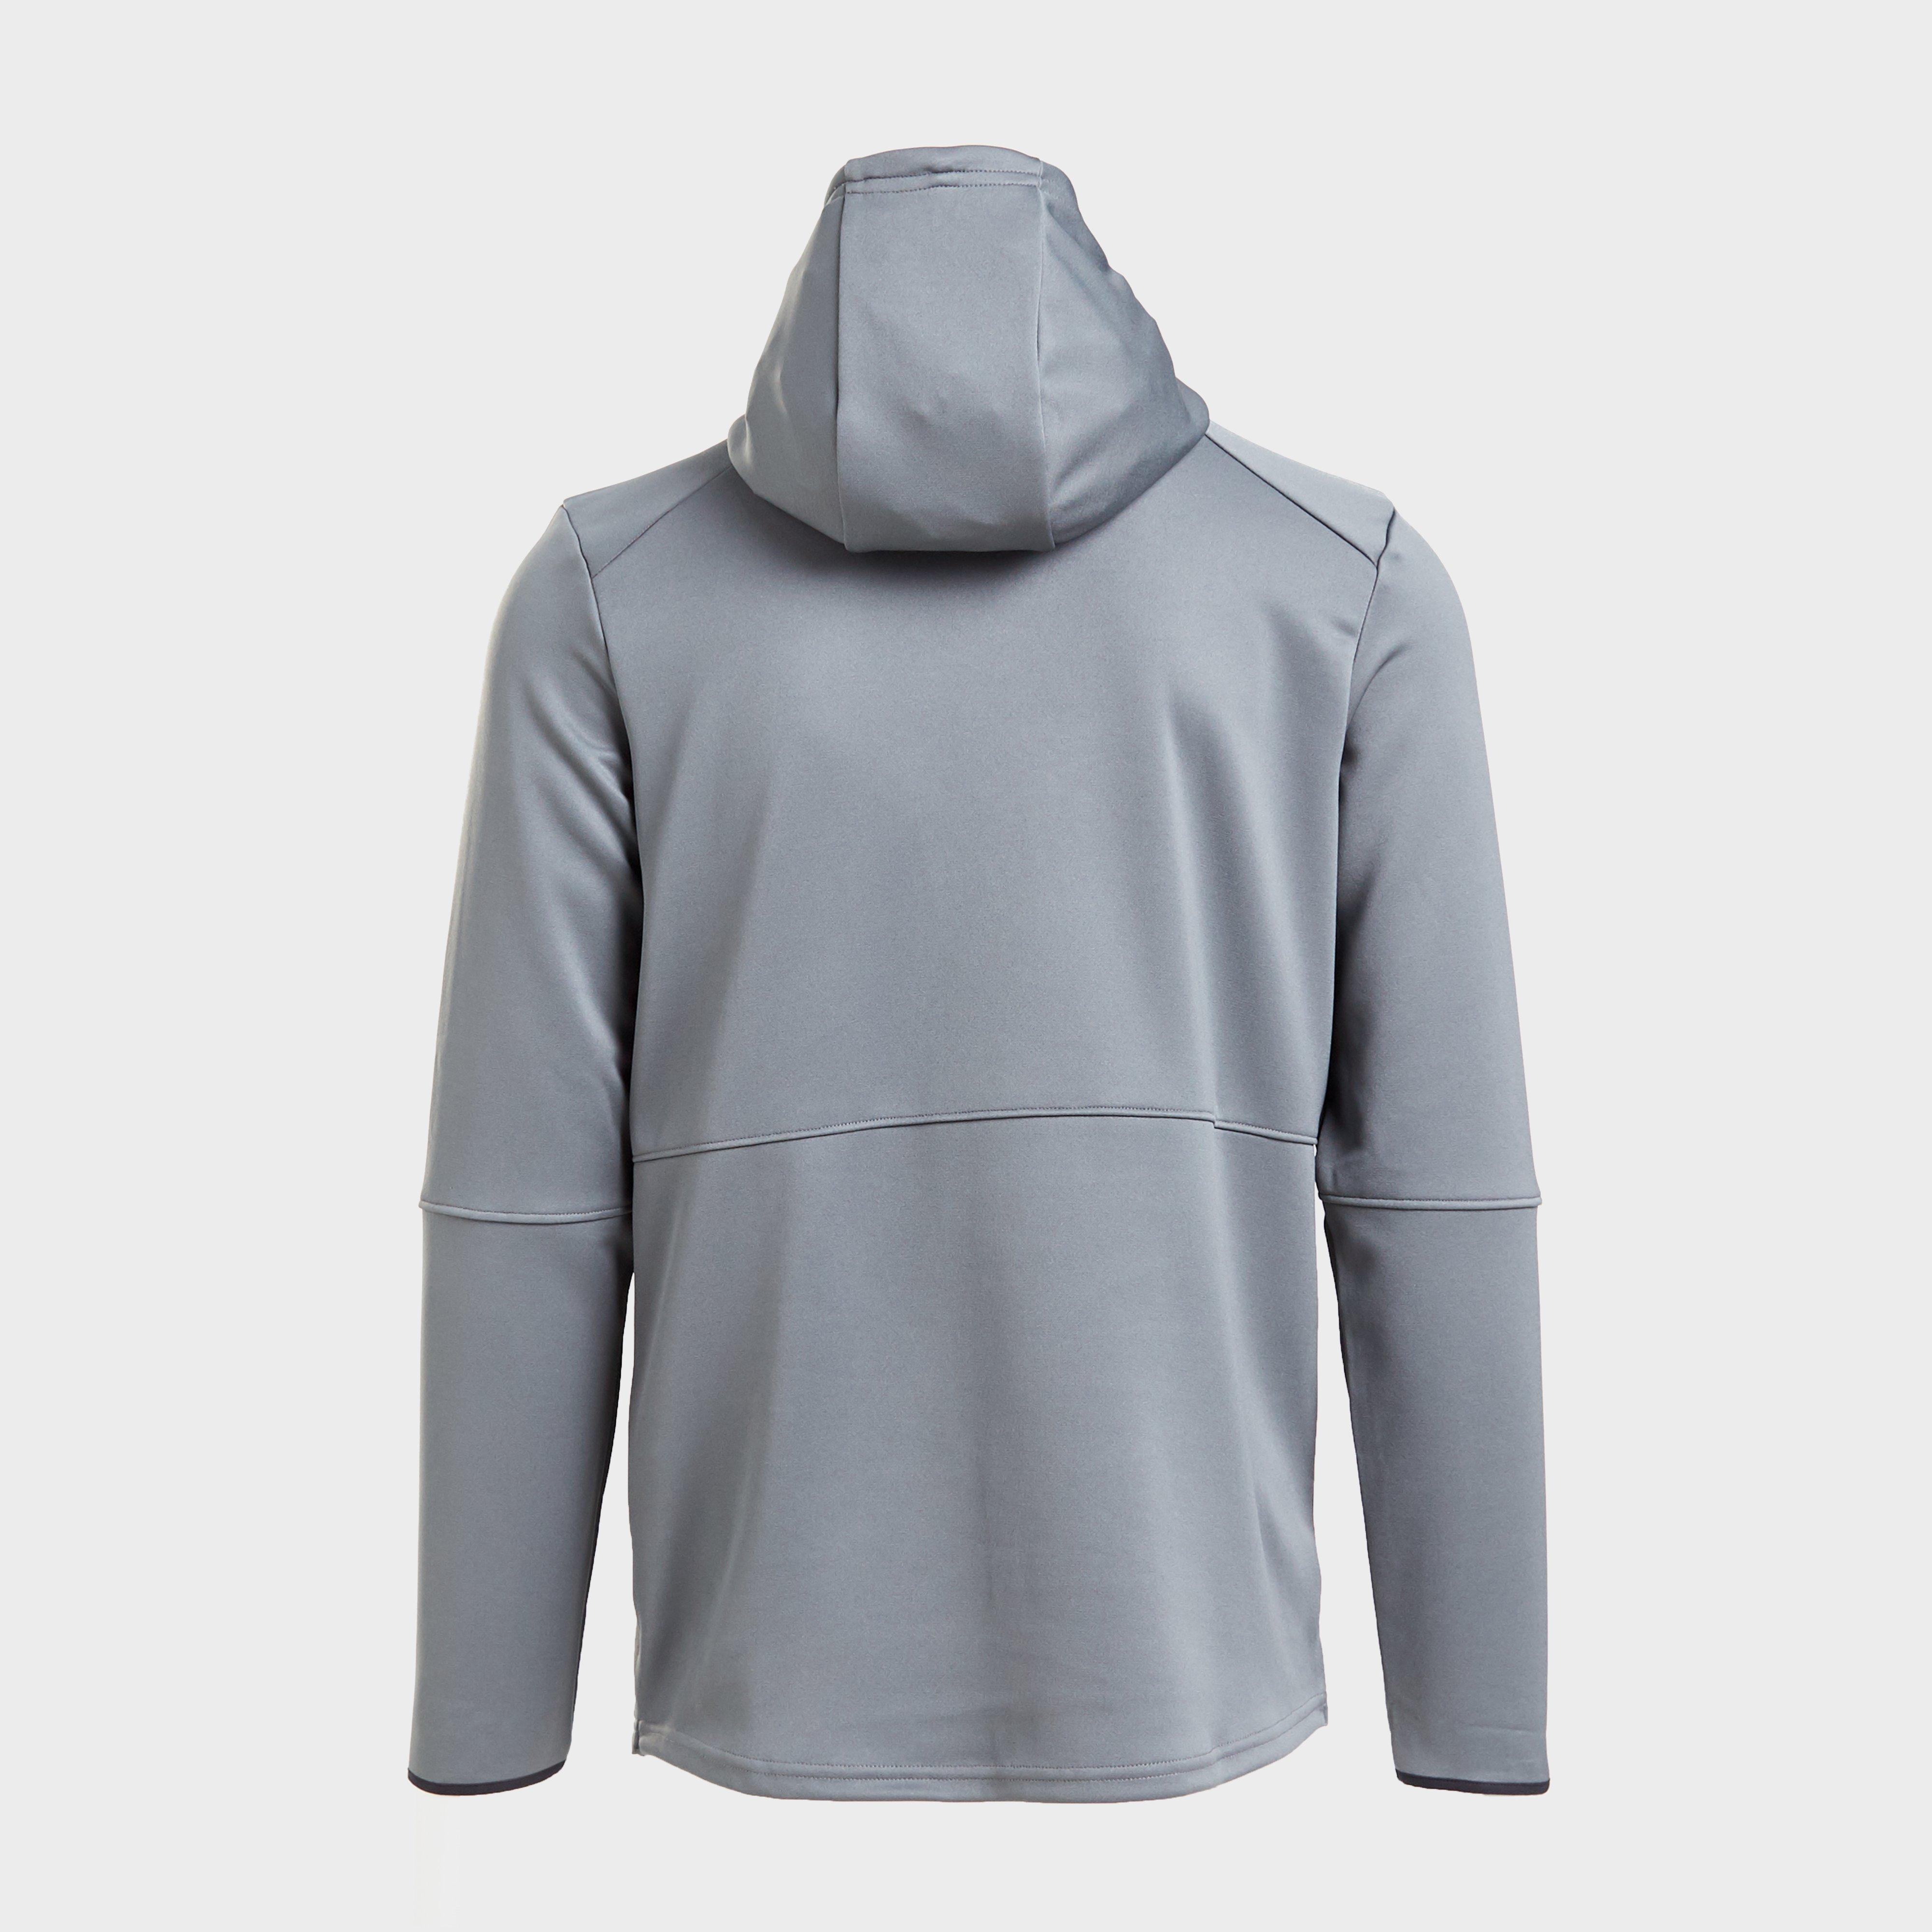 Under Armour Men's MK-1 Warm-up Hoodie Review